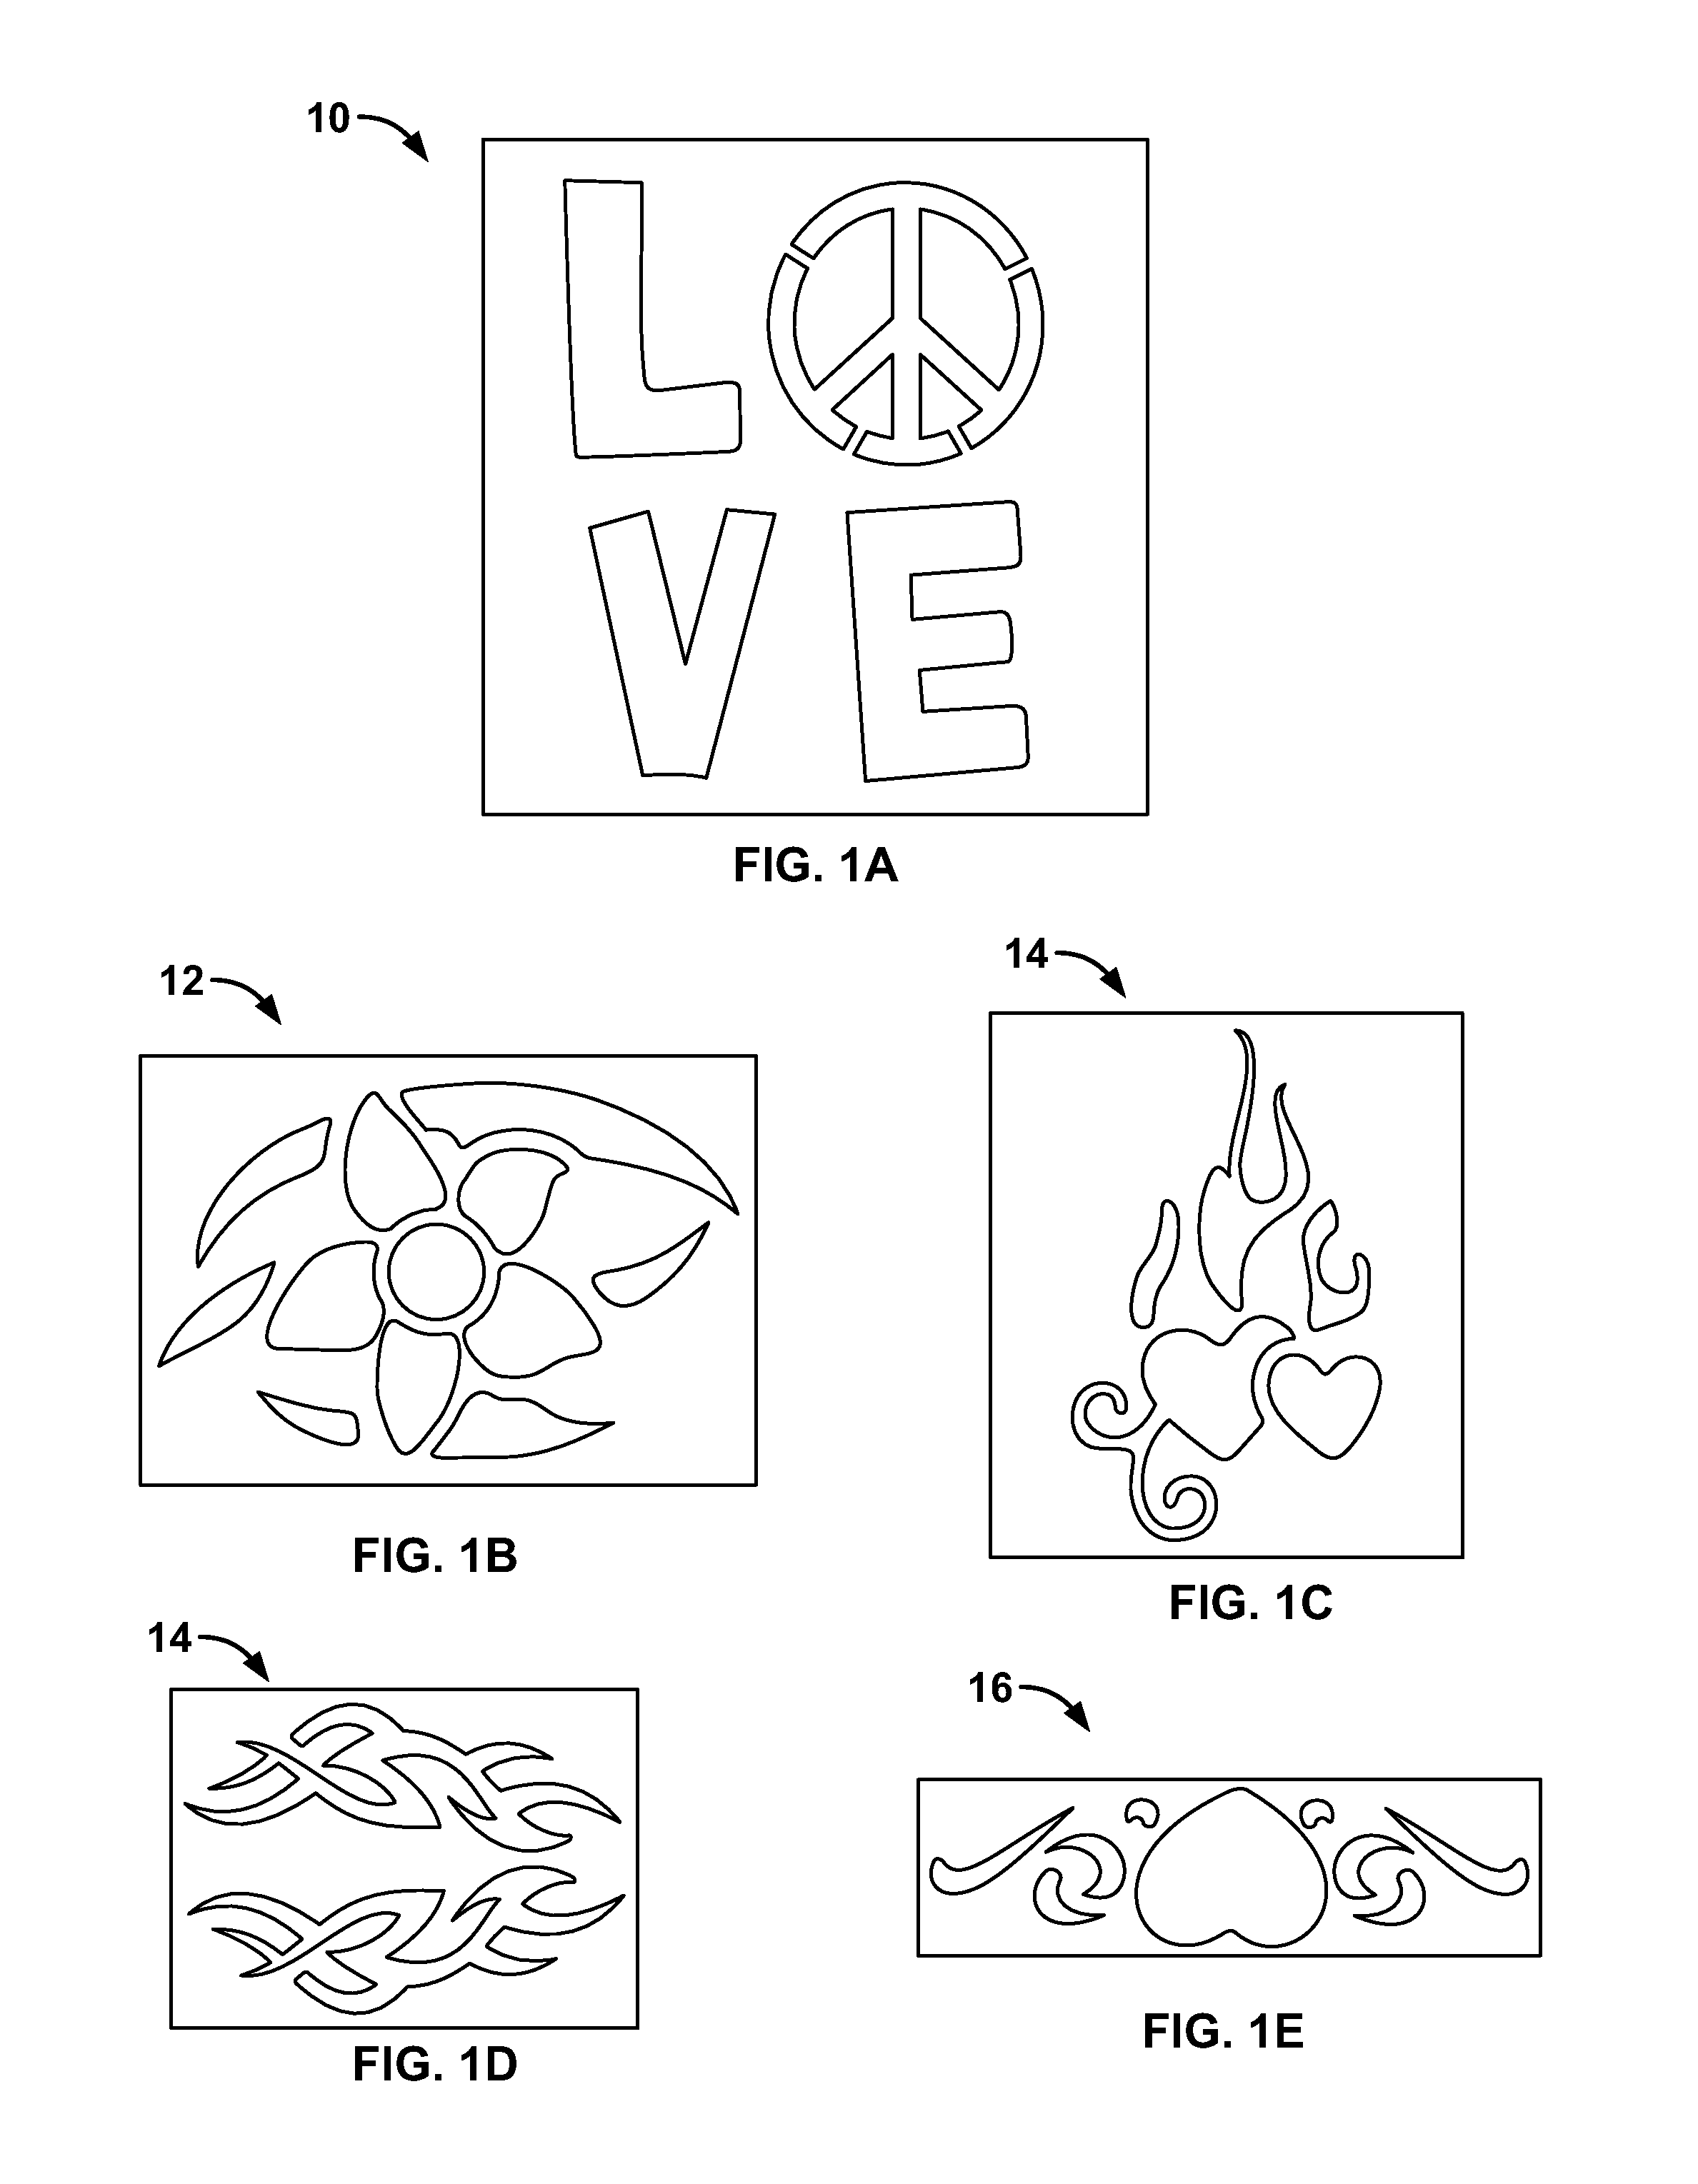 Method and apparatus for creating artistic temporary designs